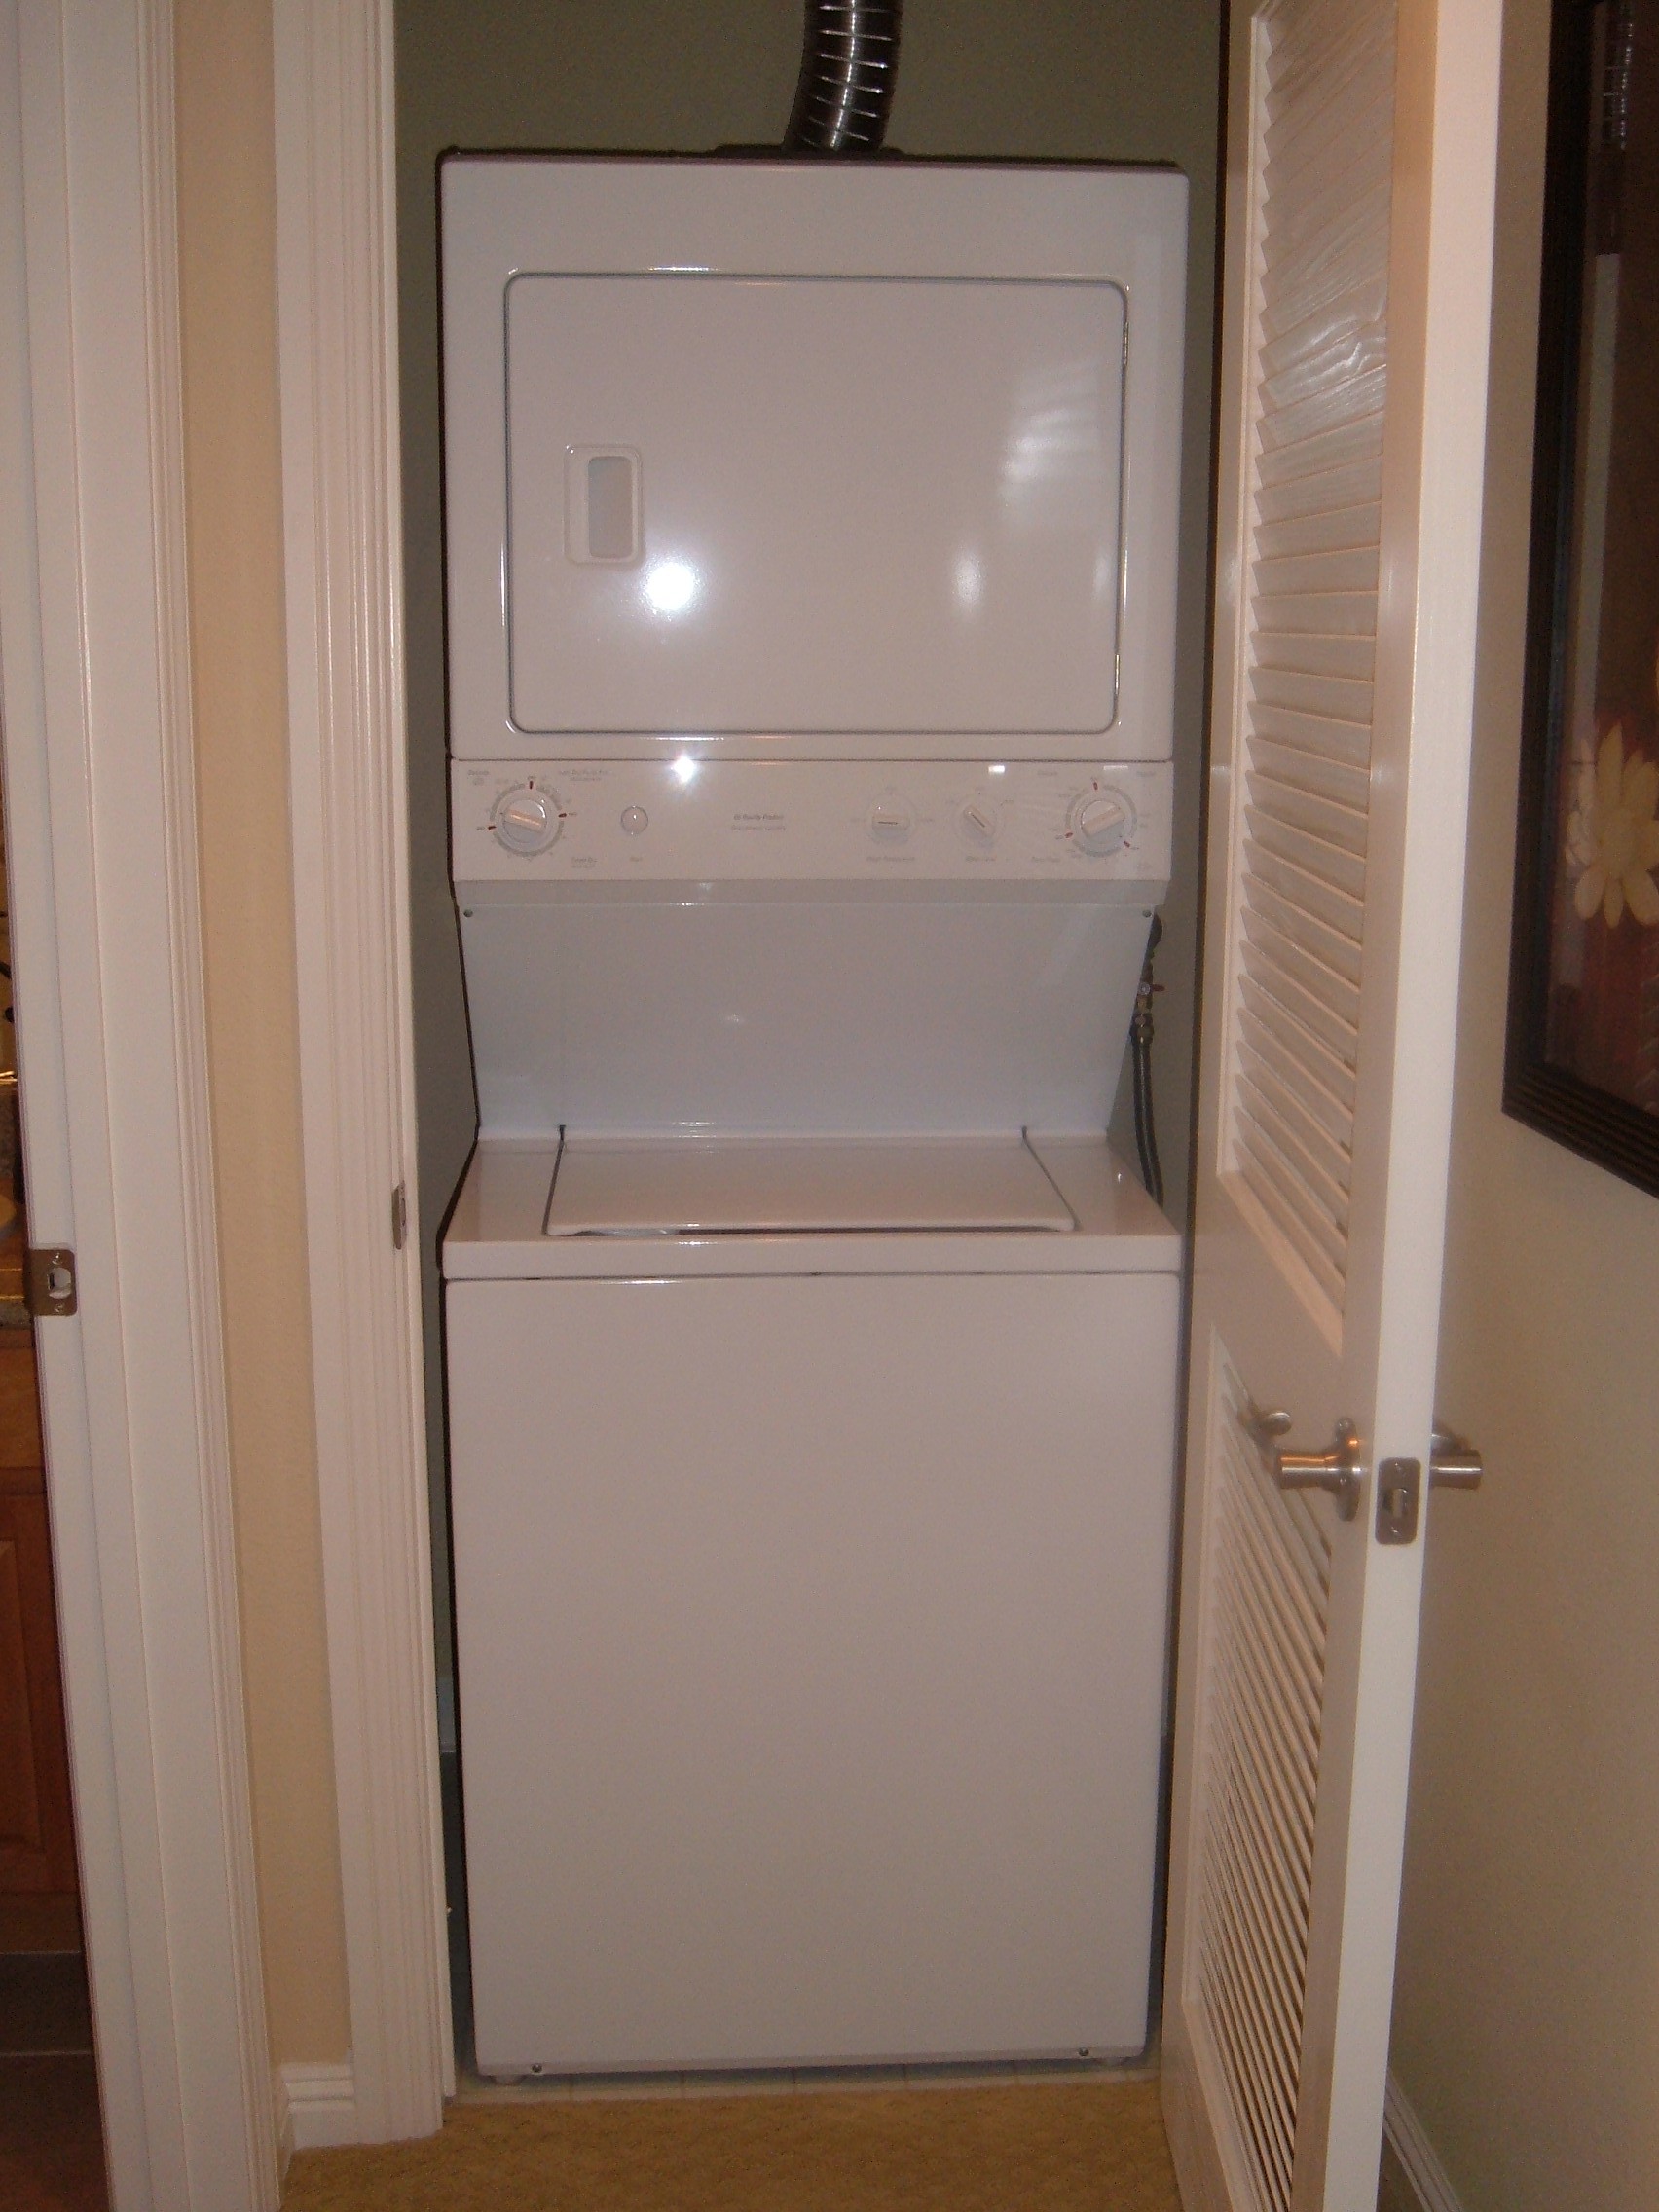 file-ge-spacemaker-washer-and-dryer-combo-jpg-wikimedia-commons